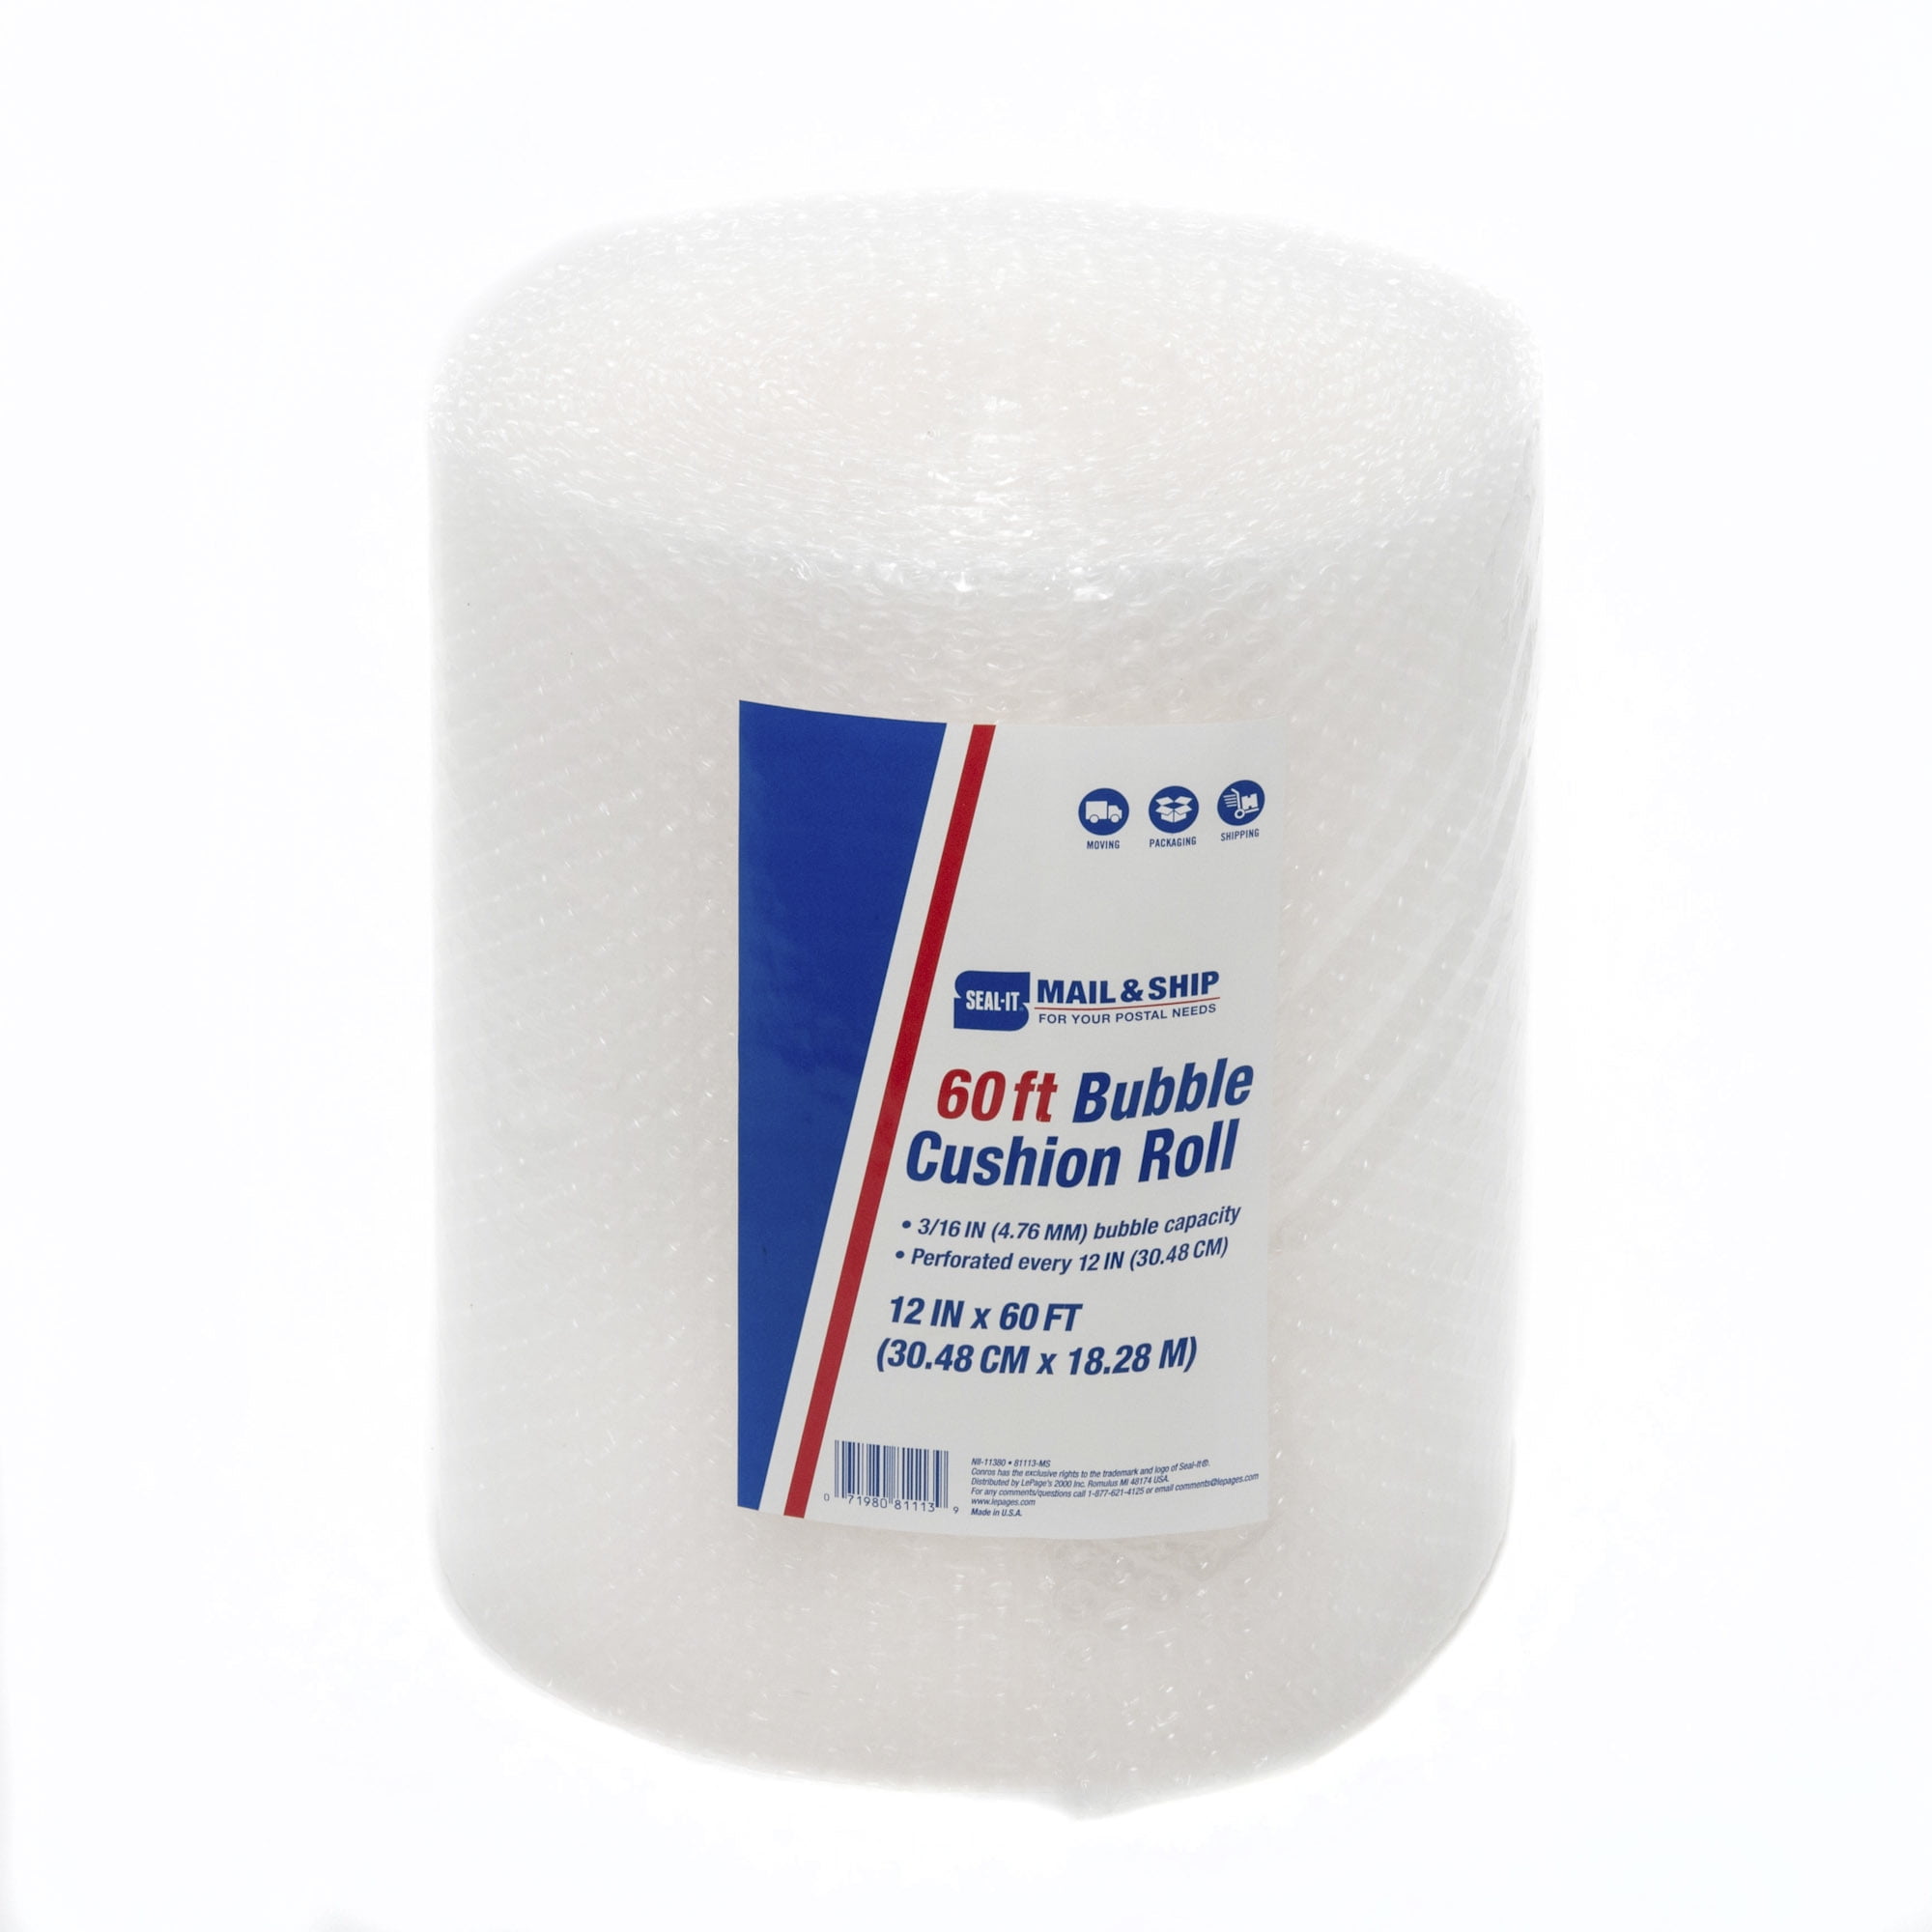 ZV 1/2" x 12" x 500' 500FT Large Clear Bubble Padding Cushioning Wrap Roll 